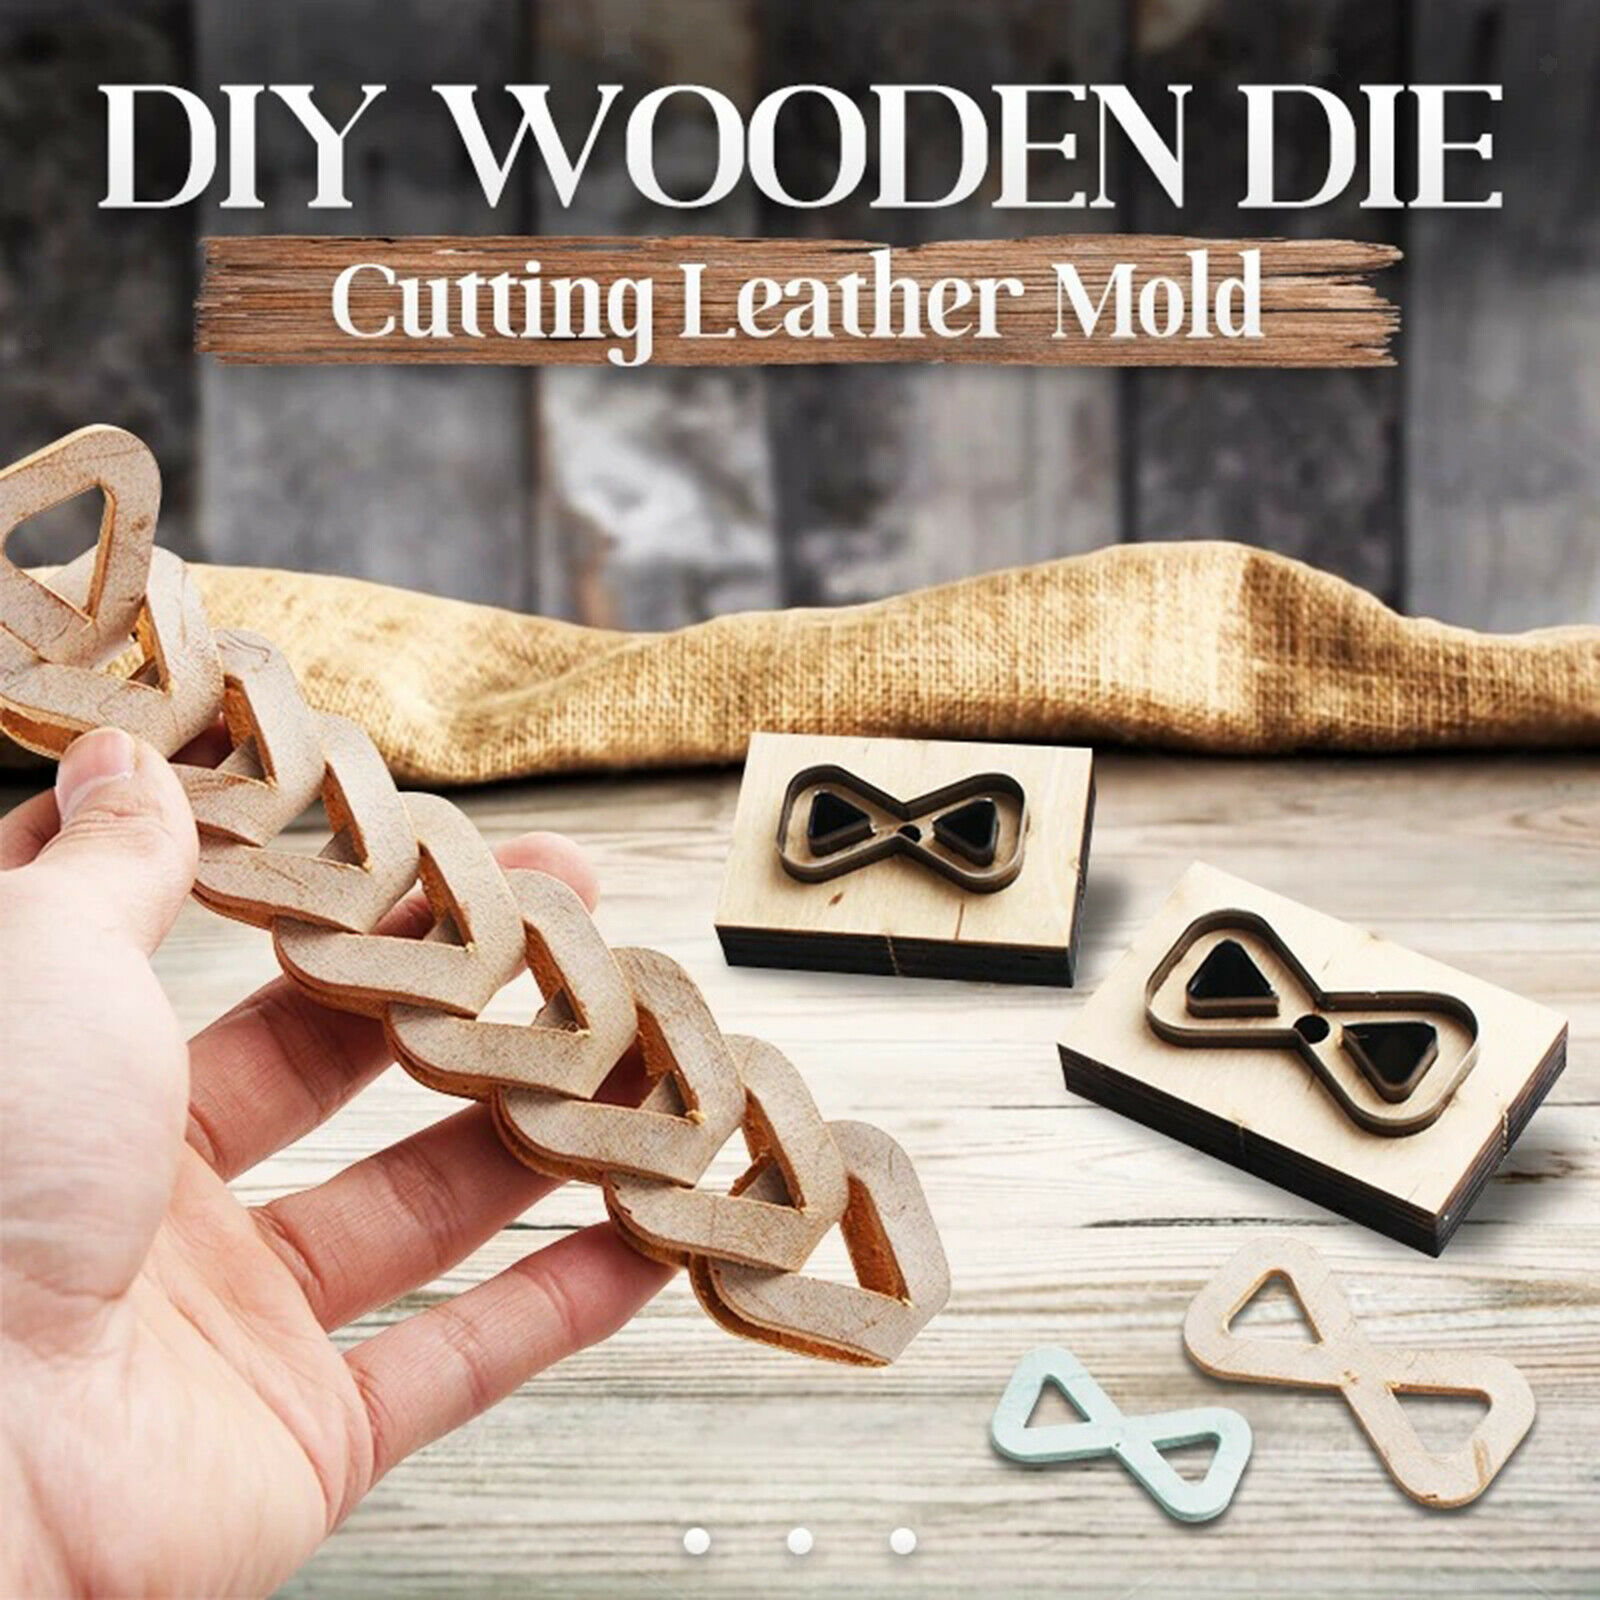 Multh-purpose Cutting Dies Leather Mold Wooden Die Cutting Leather Mold Tool